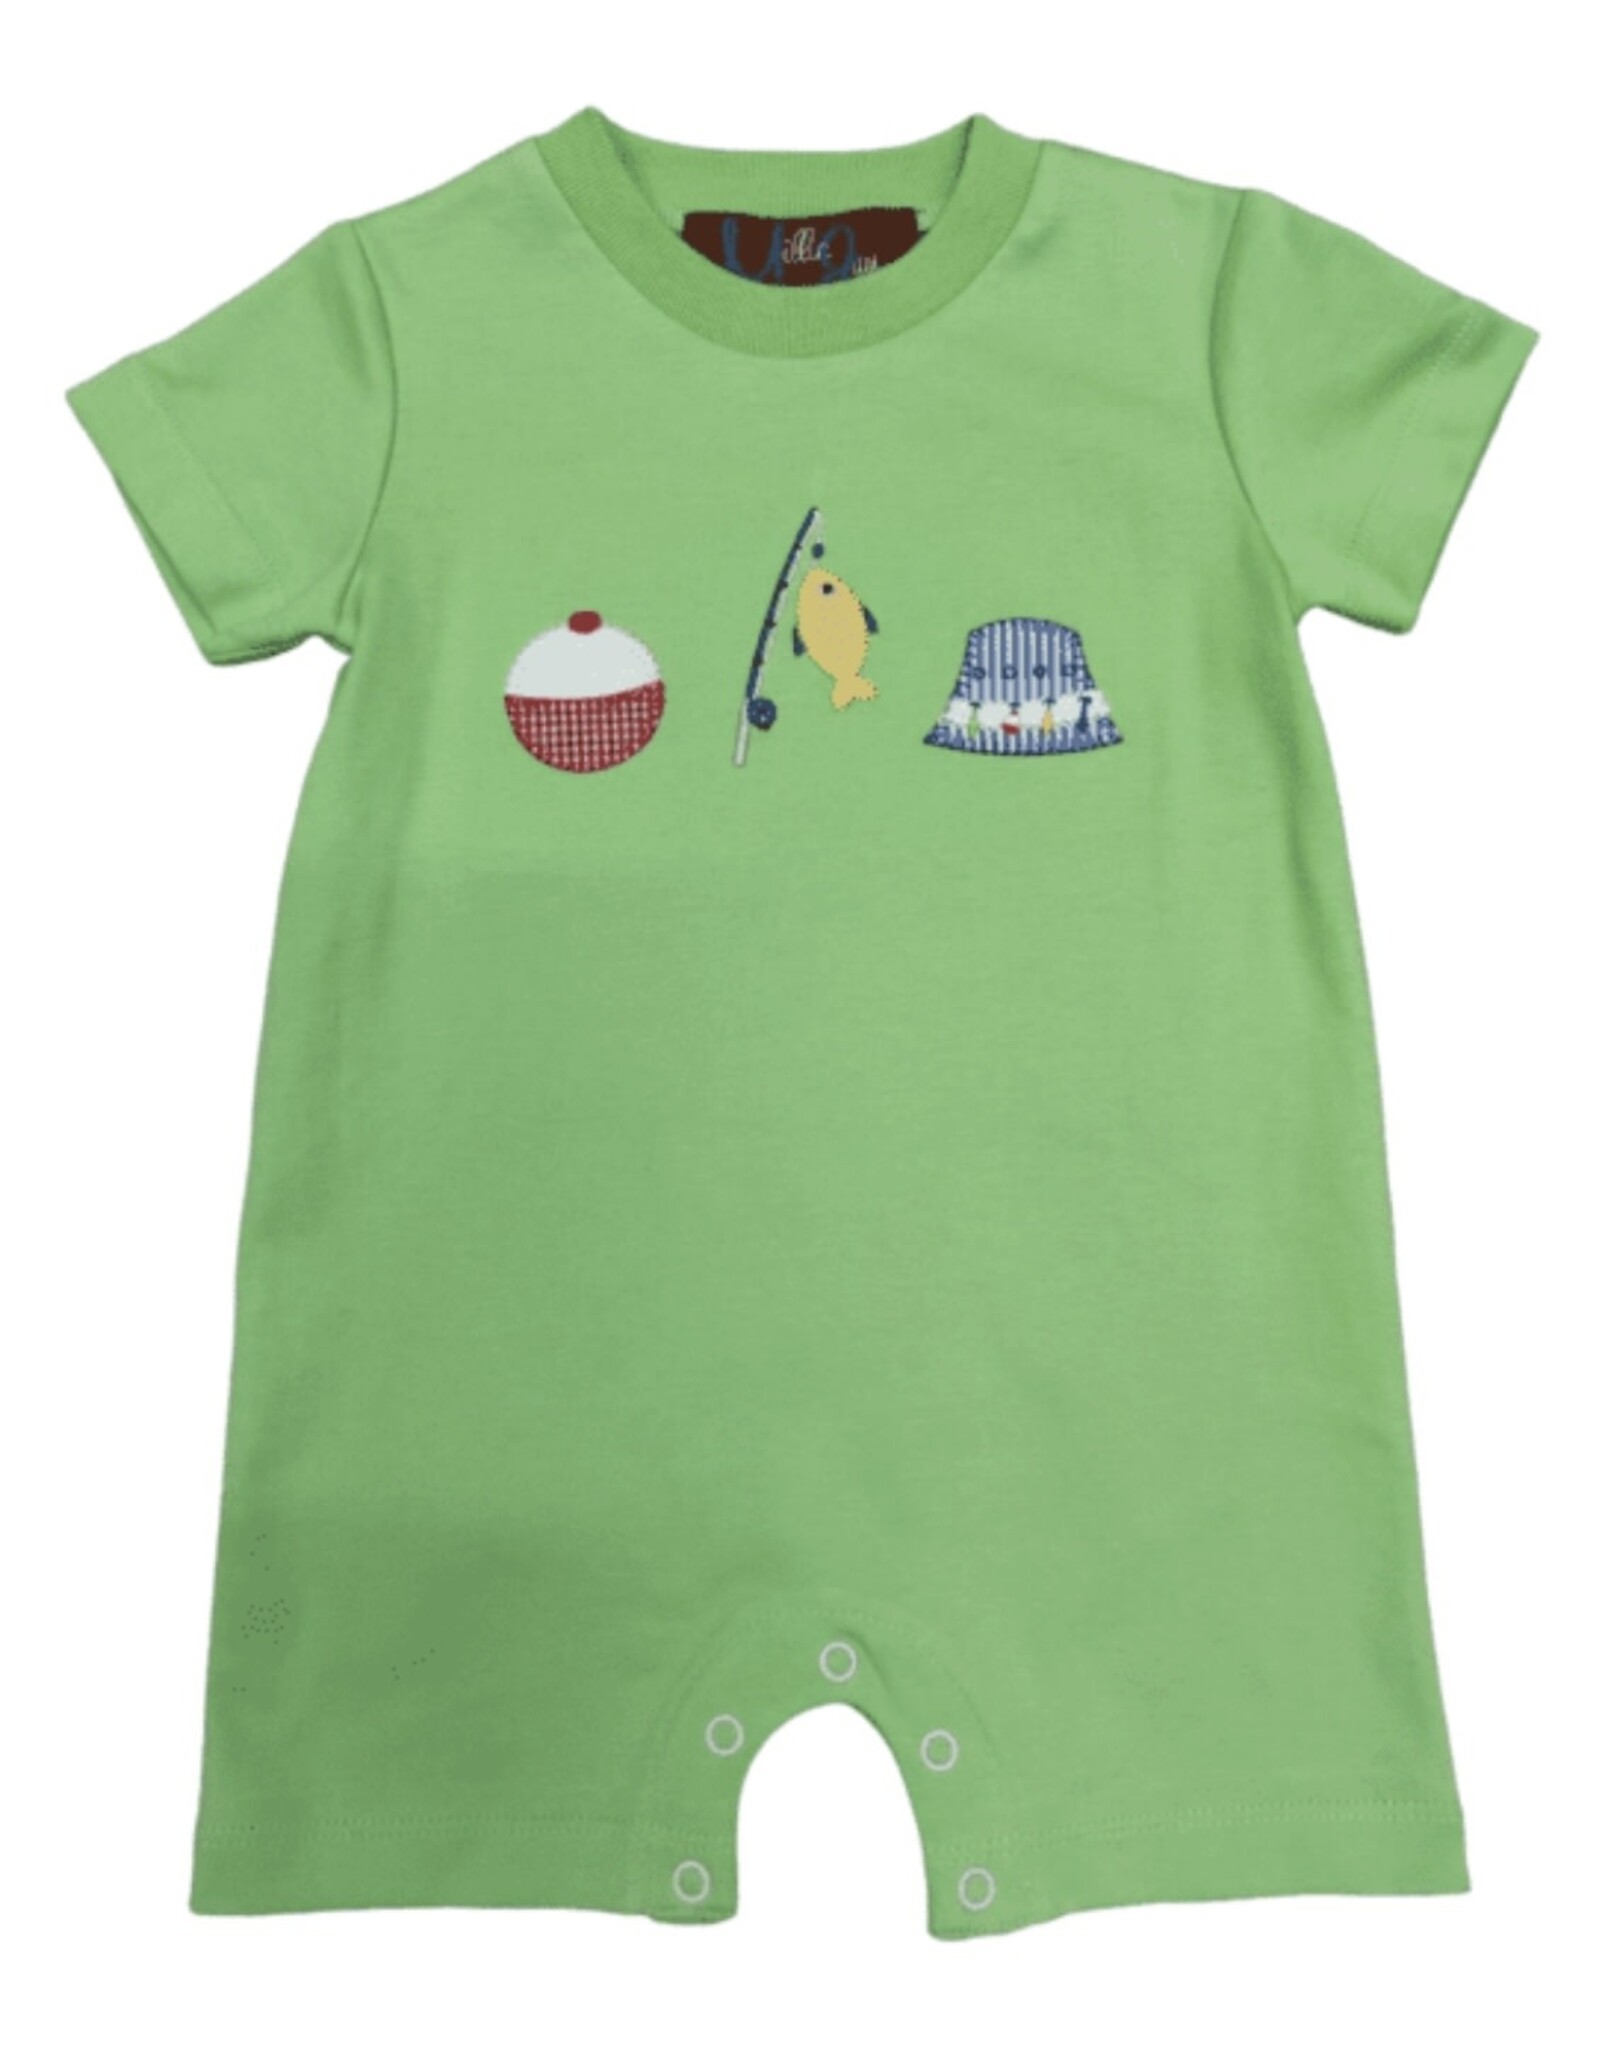 Millie Jay Millie Jay- Catch of the Day Boys Romper